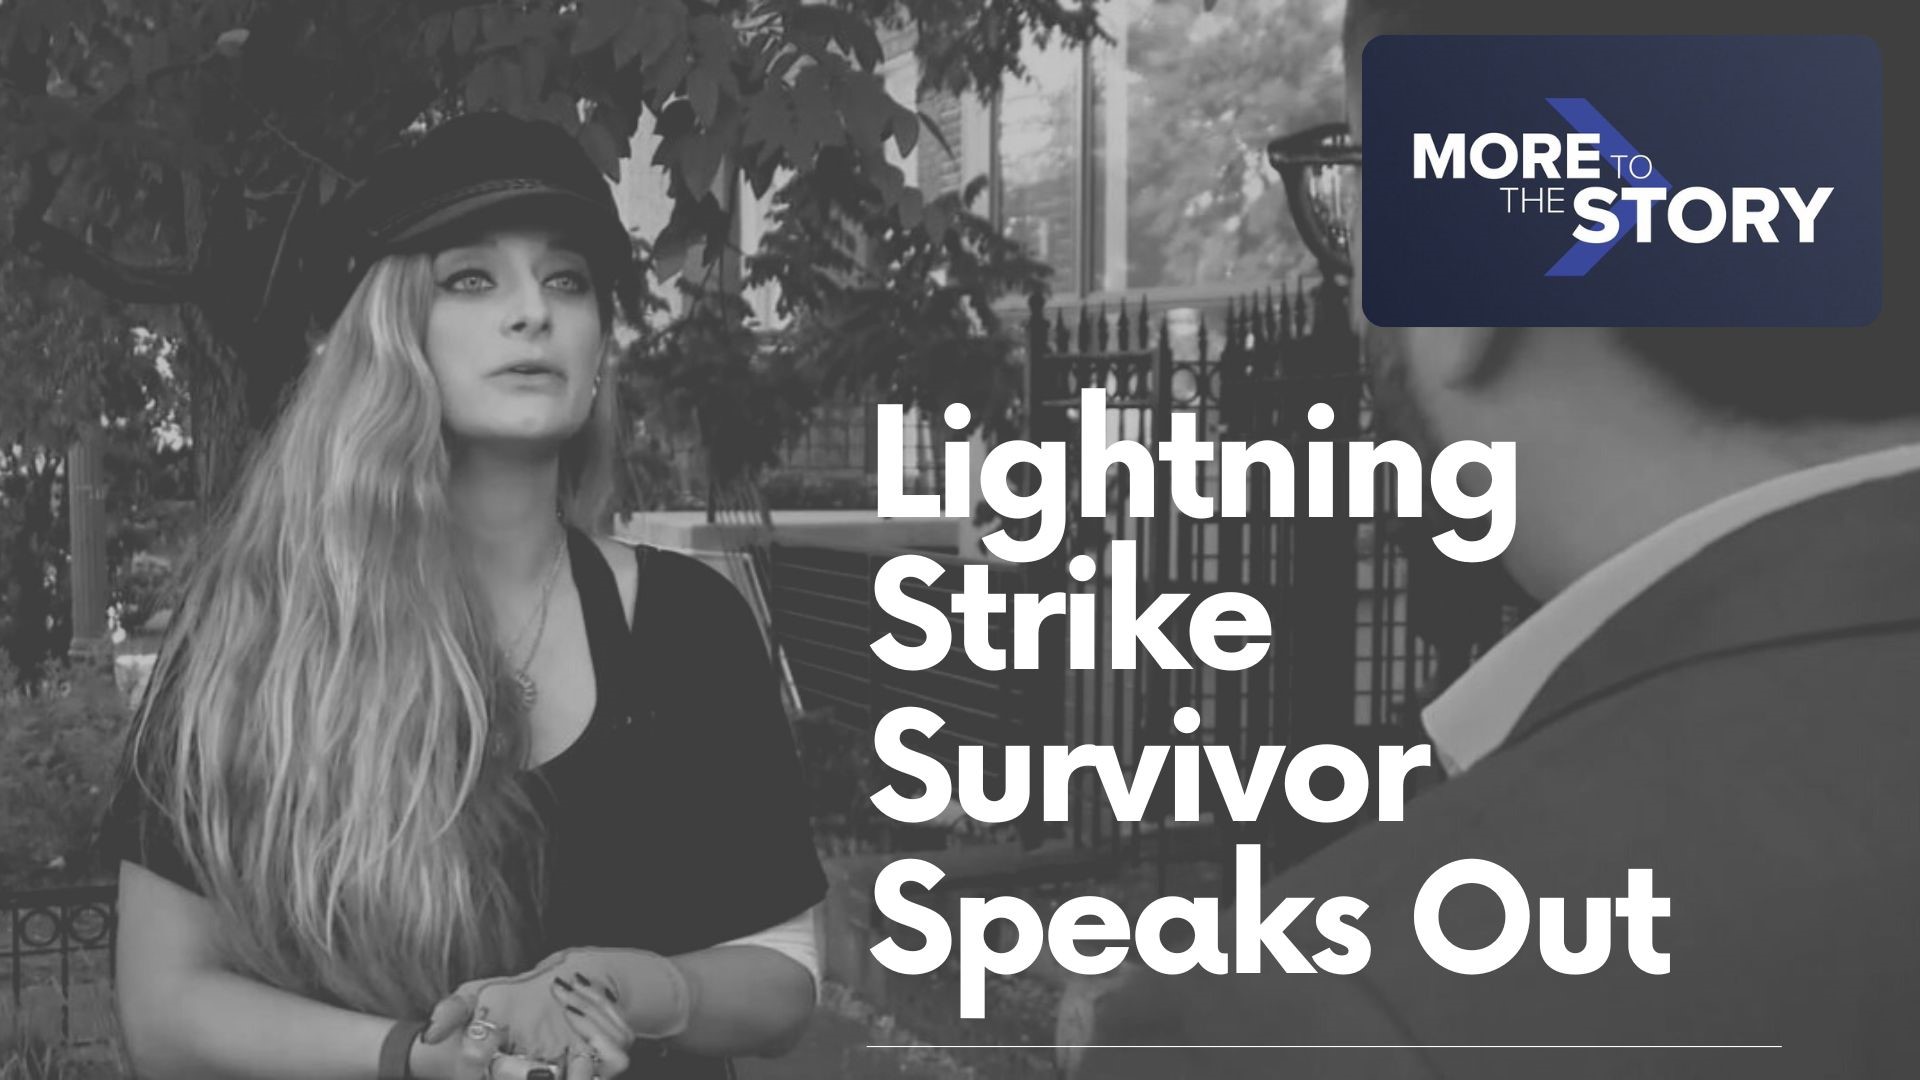 The sole survivor of a lightning strike near the White House in Washington D.C. speaks out about what she remembers from that day, and how she is recovering.